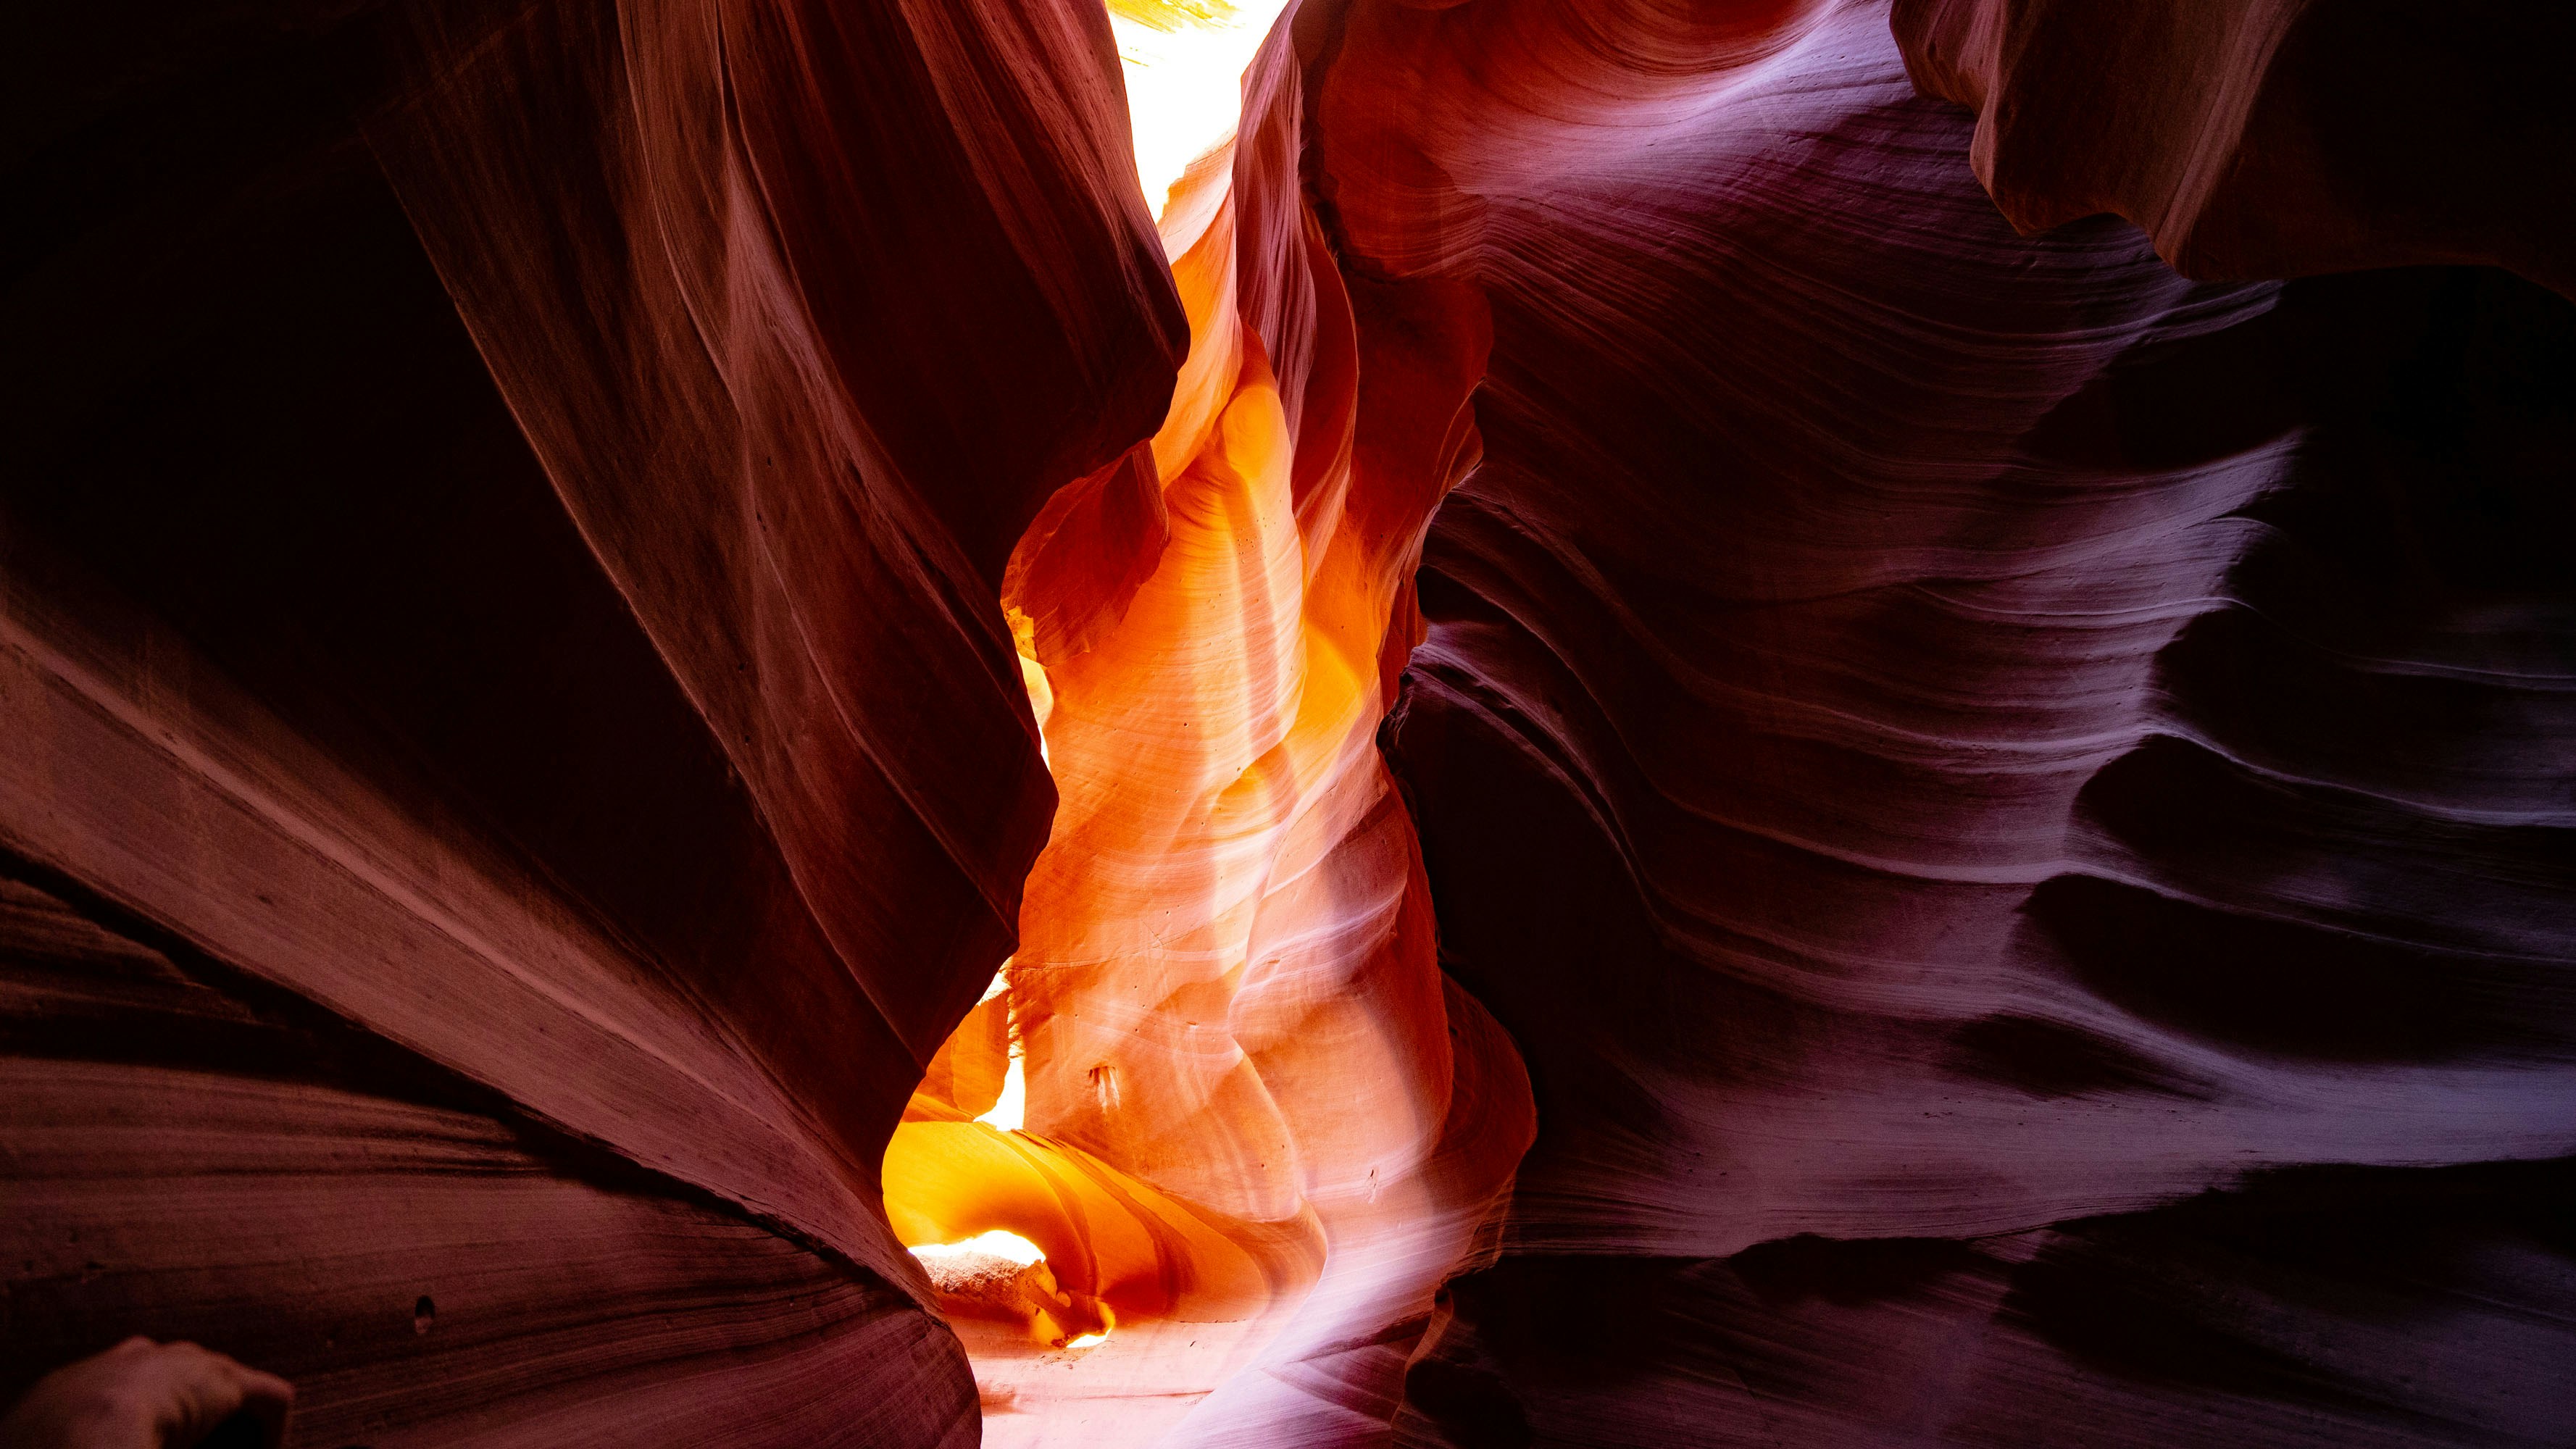 Antelope Canyon is in a very non-descript area of northern Arizona. So close to the edge of the Grand Canyon and Lake Powell, but It could be one of the most beautiful places in the world.